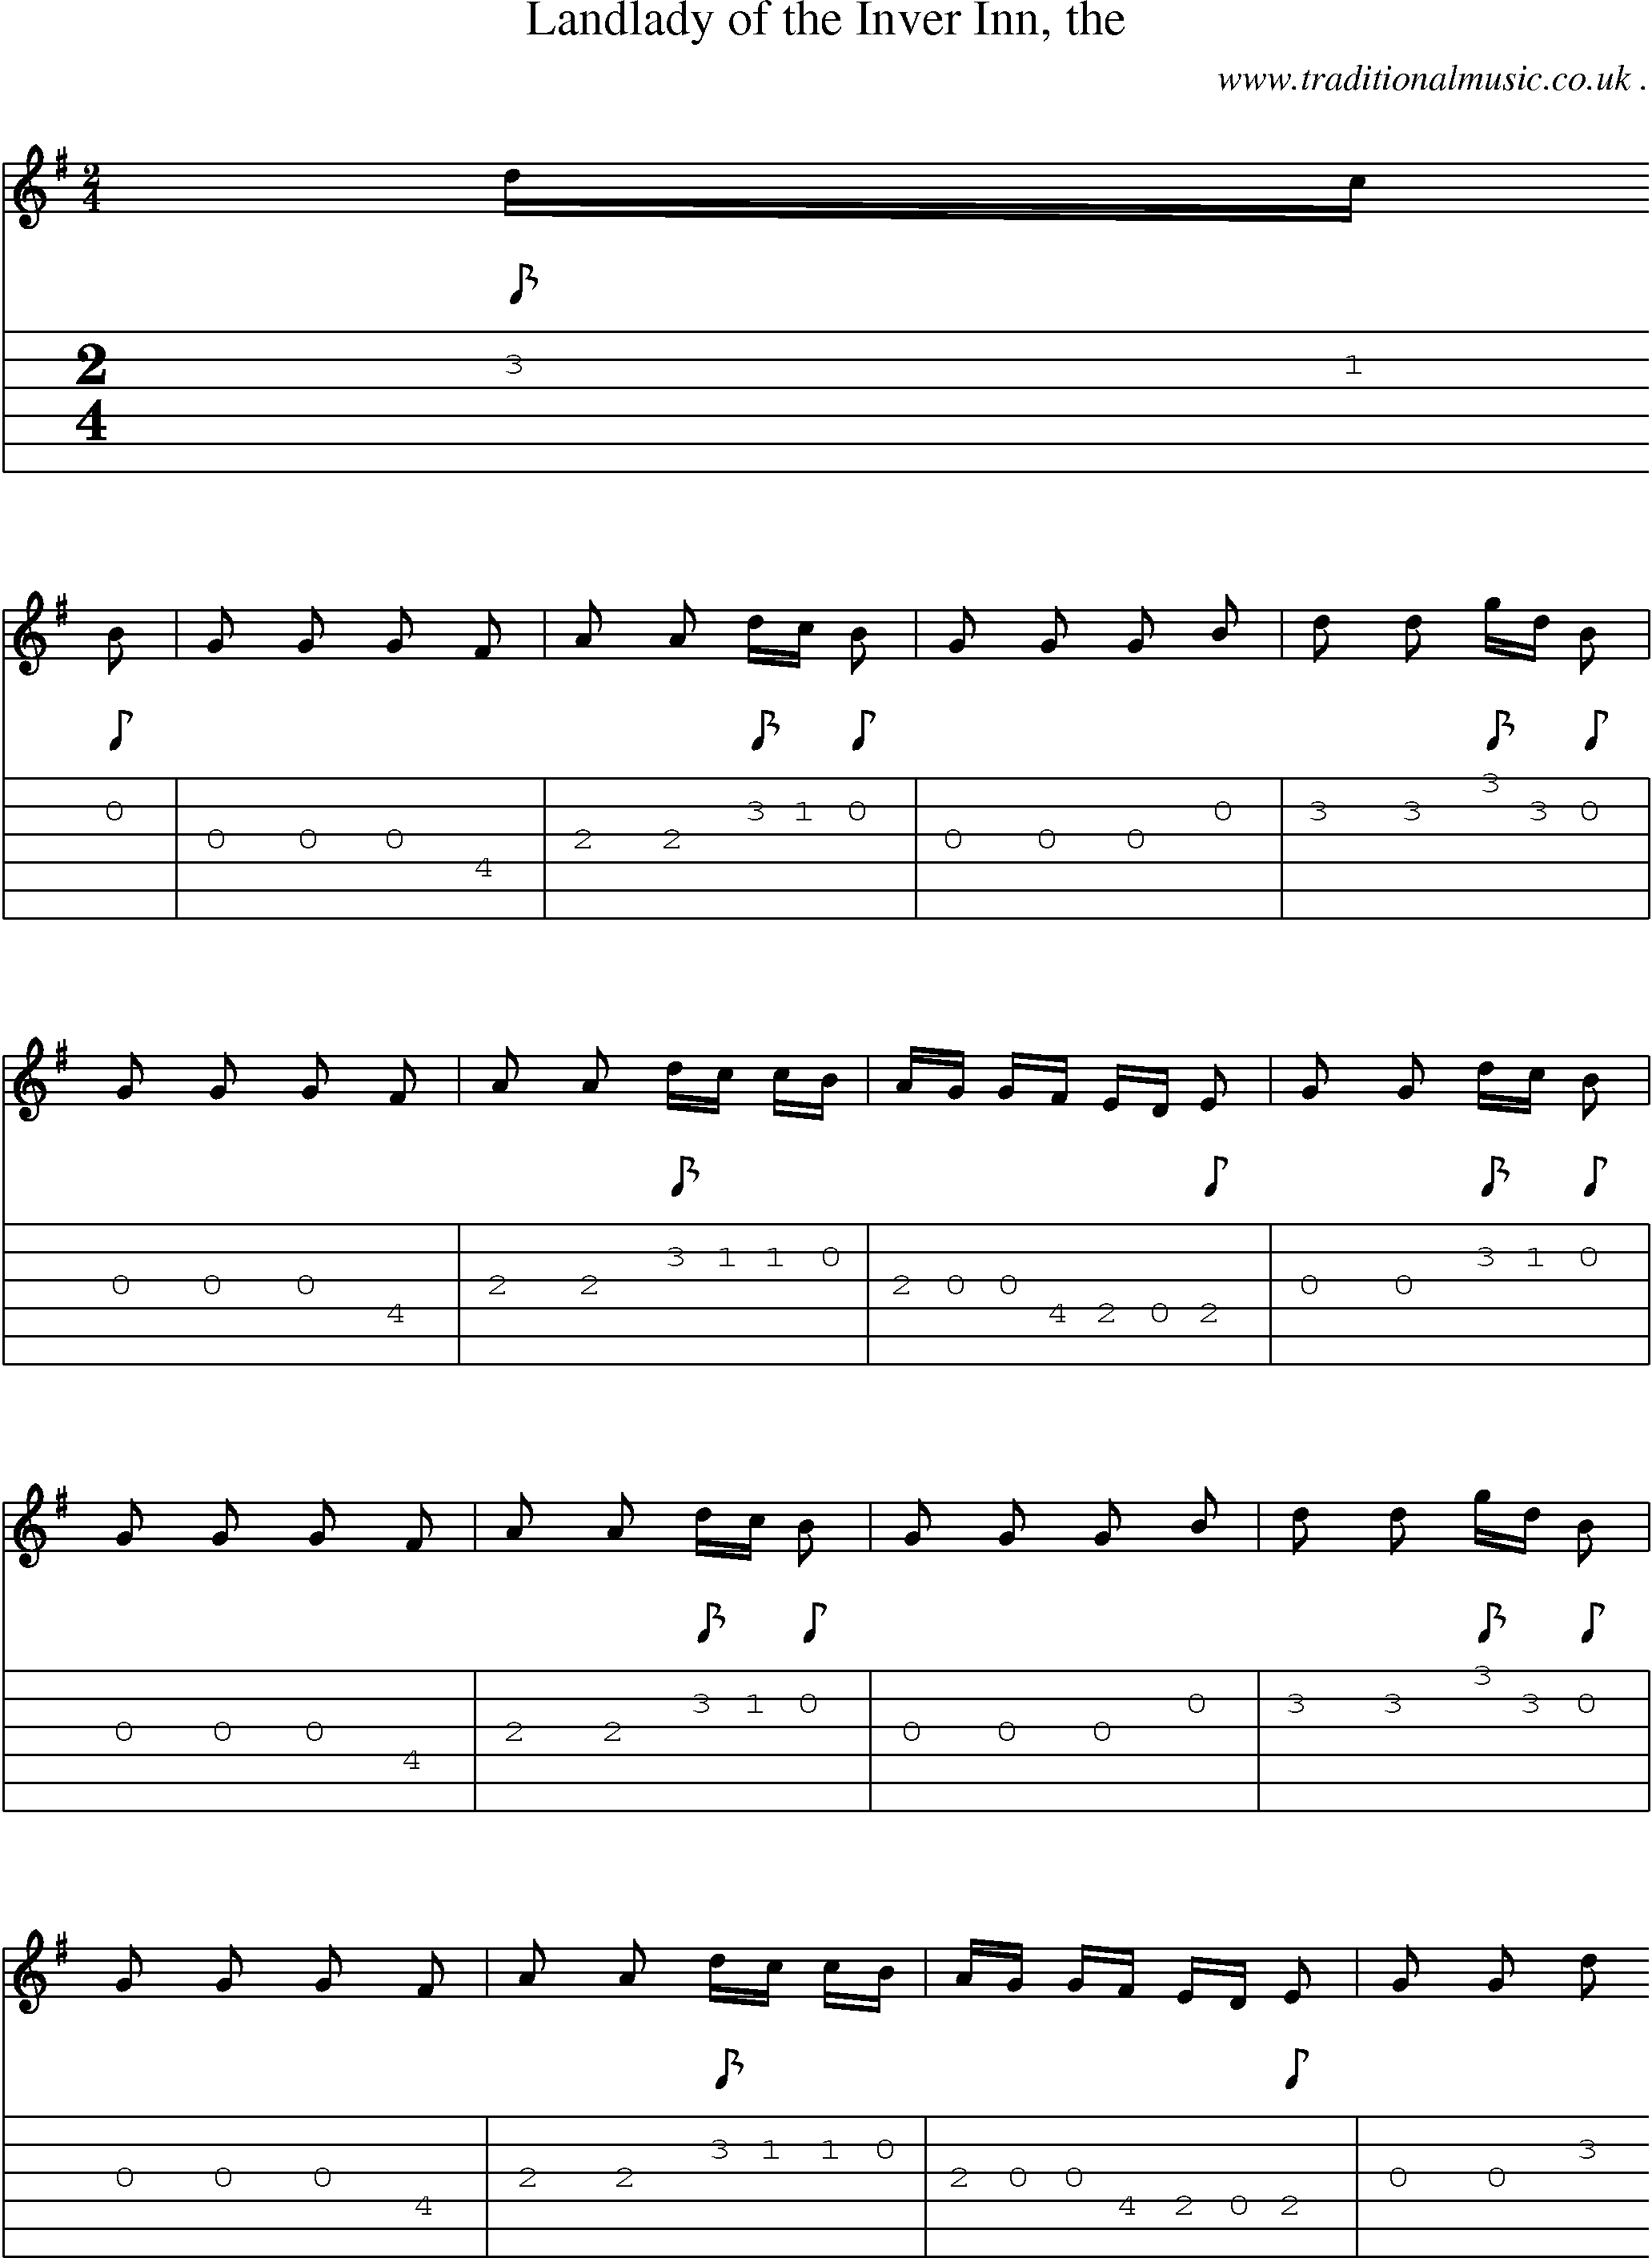 Sheet-music  score, Chords and Guitar Tabs for Landlady Of The Inver Inn The